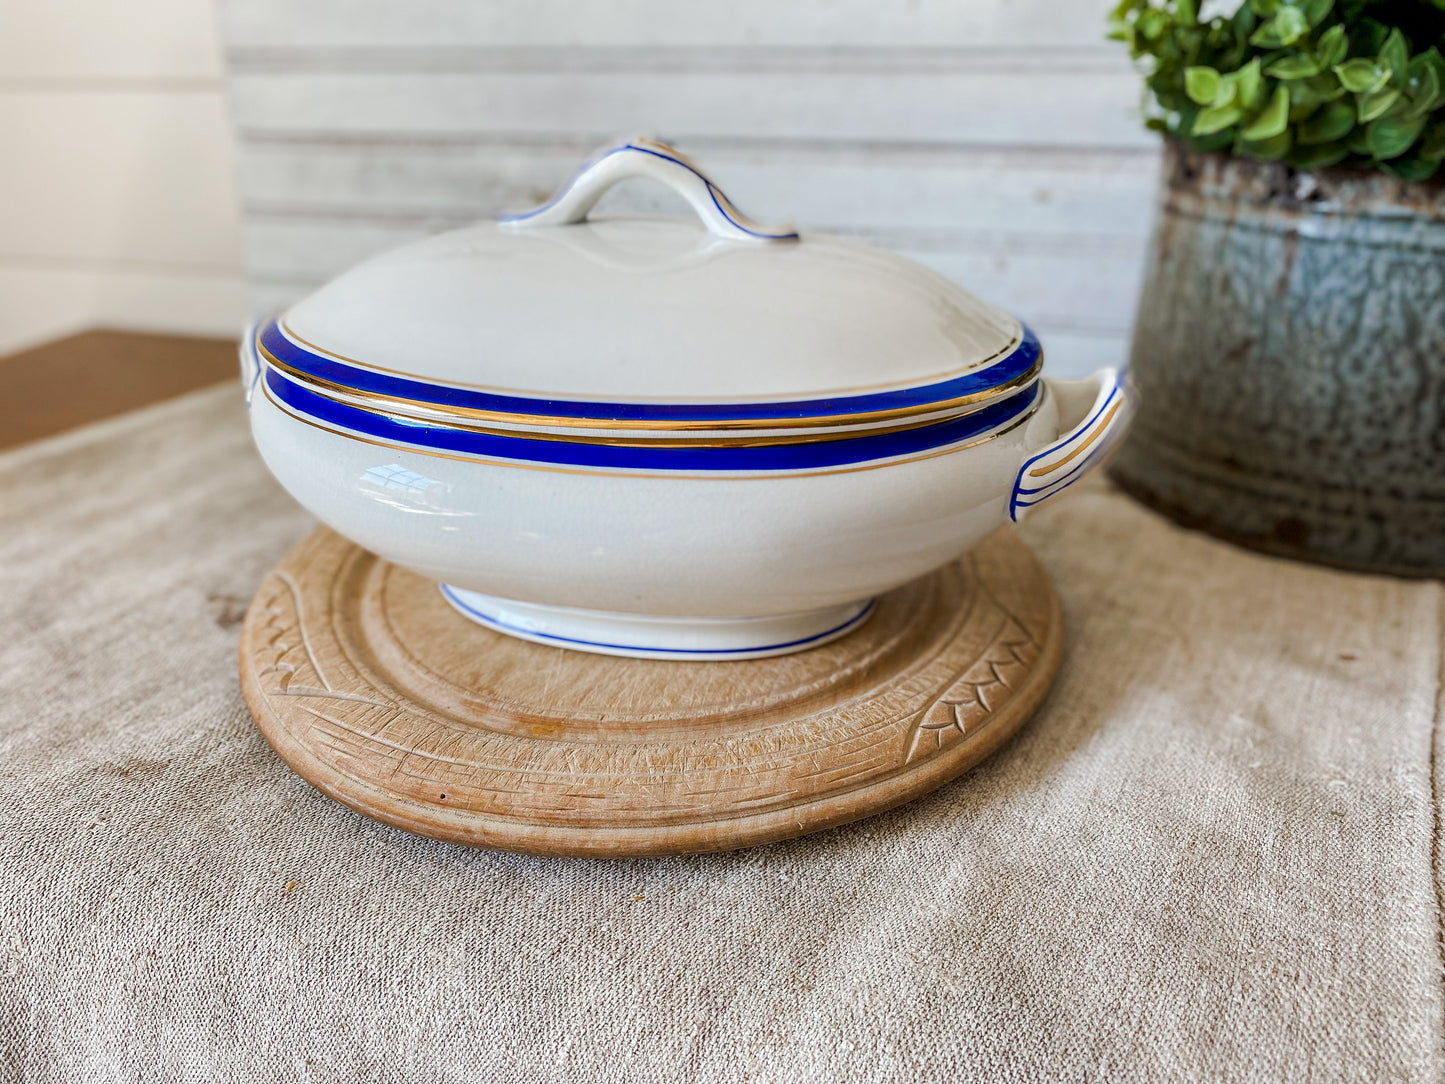 Vintage Blue and Gold Ceramic Art Deco Tureen | Egersunds Fayancefabriks Norway | Crazed White Serving Dish with Lid